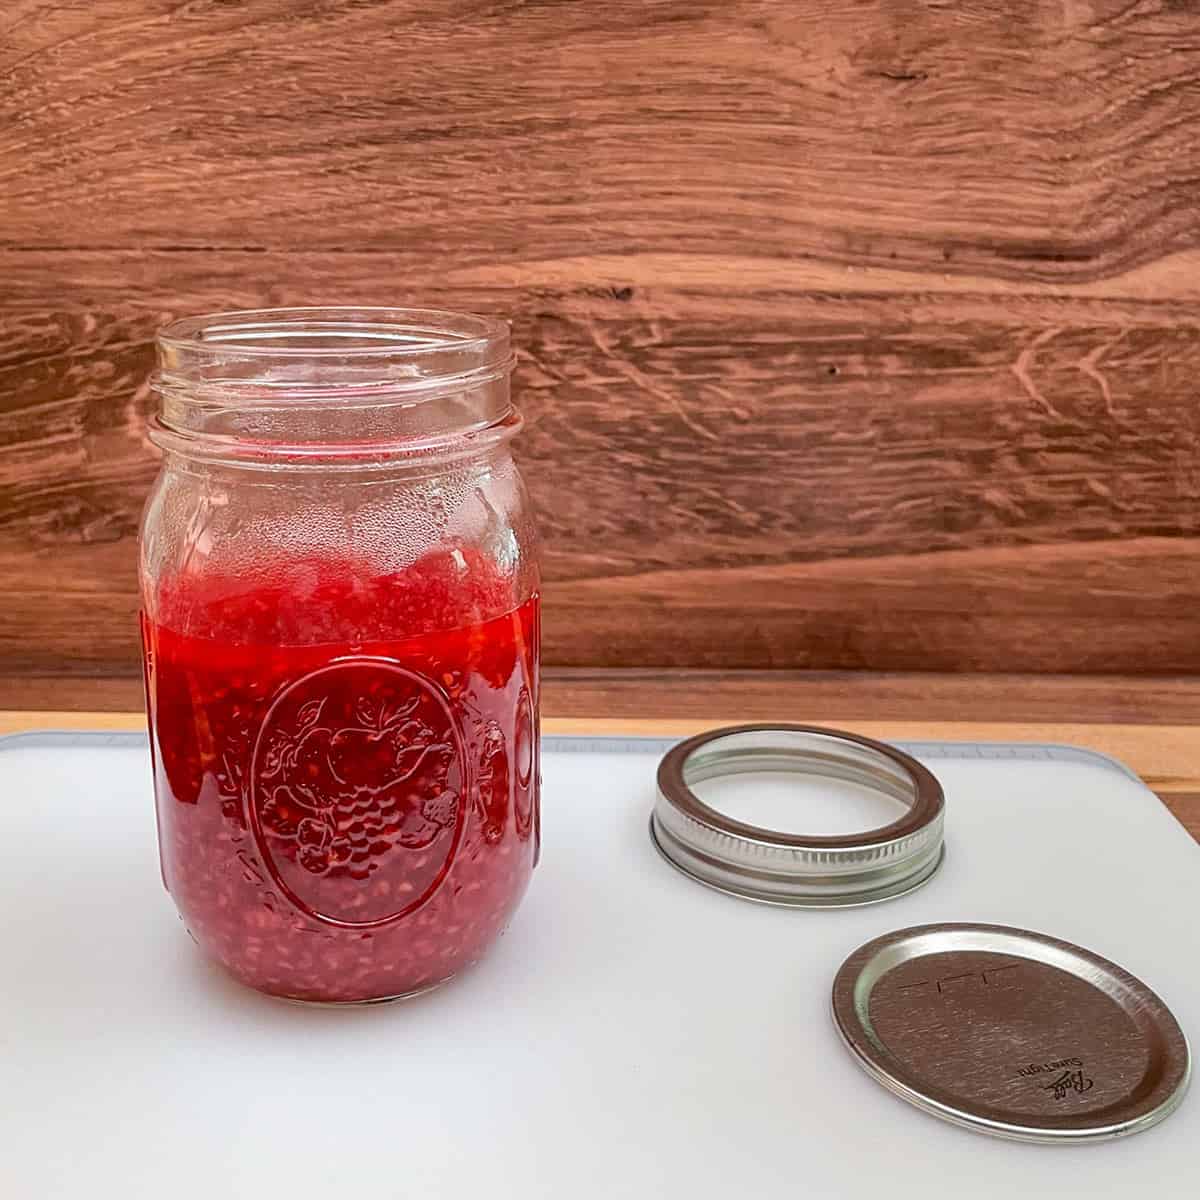 Warm Raspberry Jam in a glass container to finish cooling before adding a lid and placing it into the refrigerator.